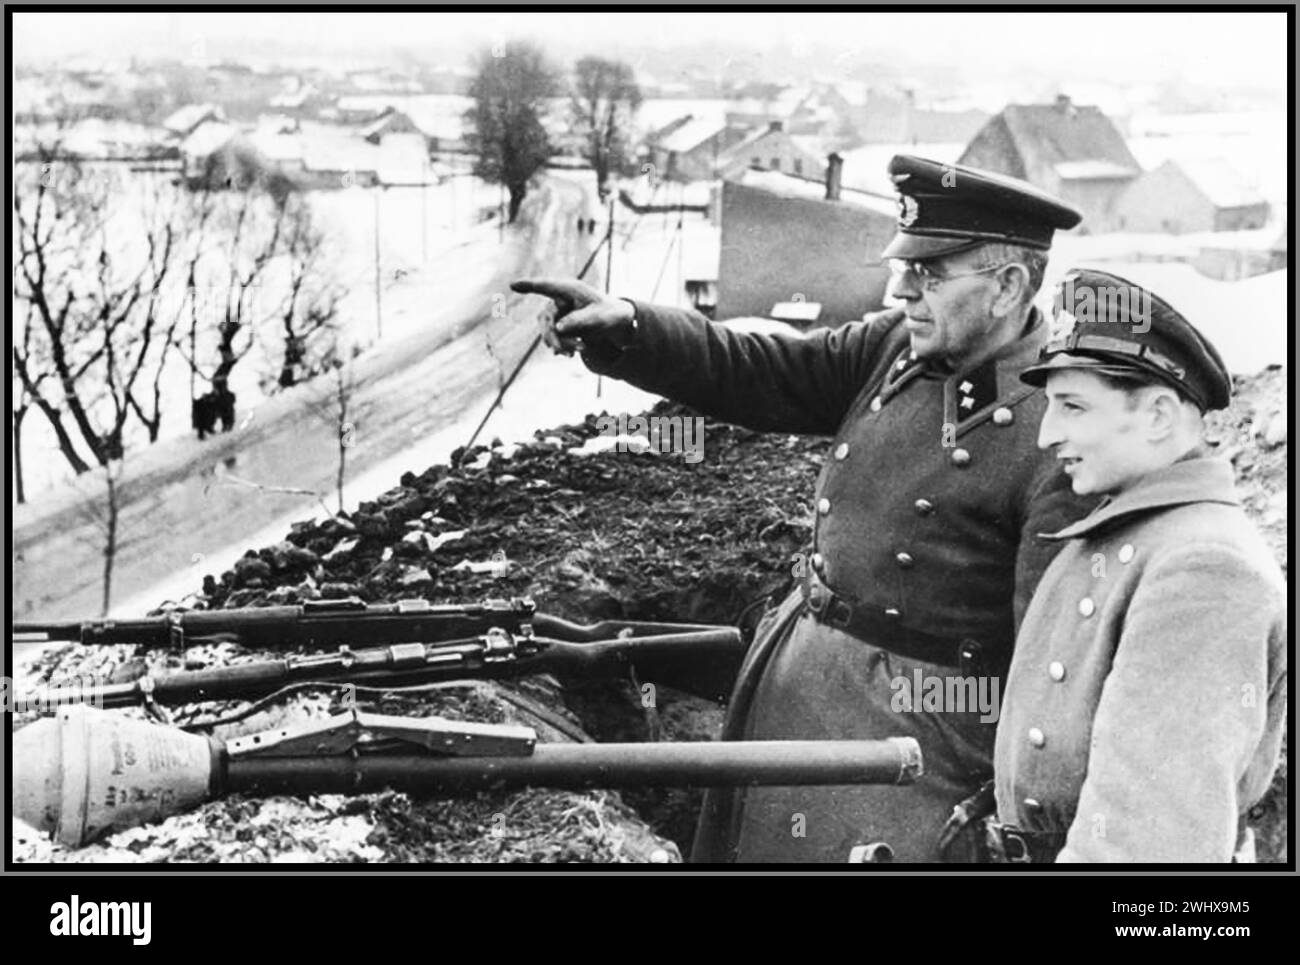 WW2 1945 VOLKSSTURM  ( Peoples Storm) Older Nazi Wehrmacht army officer explains defence actions required to Hitler Youth Hitlerjugend with a PANZERFAUST anti tank launcher at the ready. Hitler decreed as a last defence that all men in Nazi Germany from 16-60 years should prepare to defend The Fatherland Third Reich Nazi Germany Stock Photo